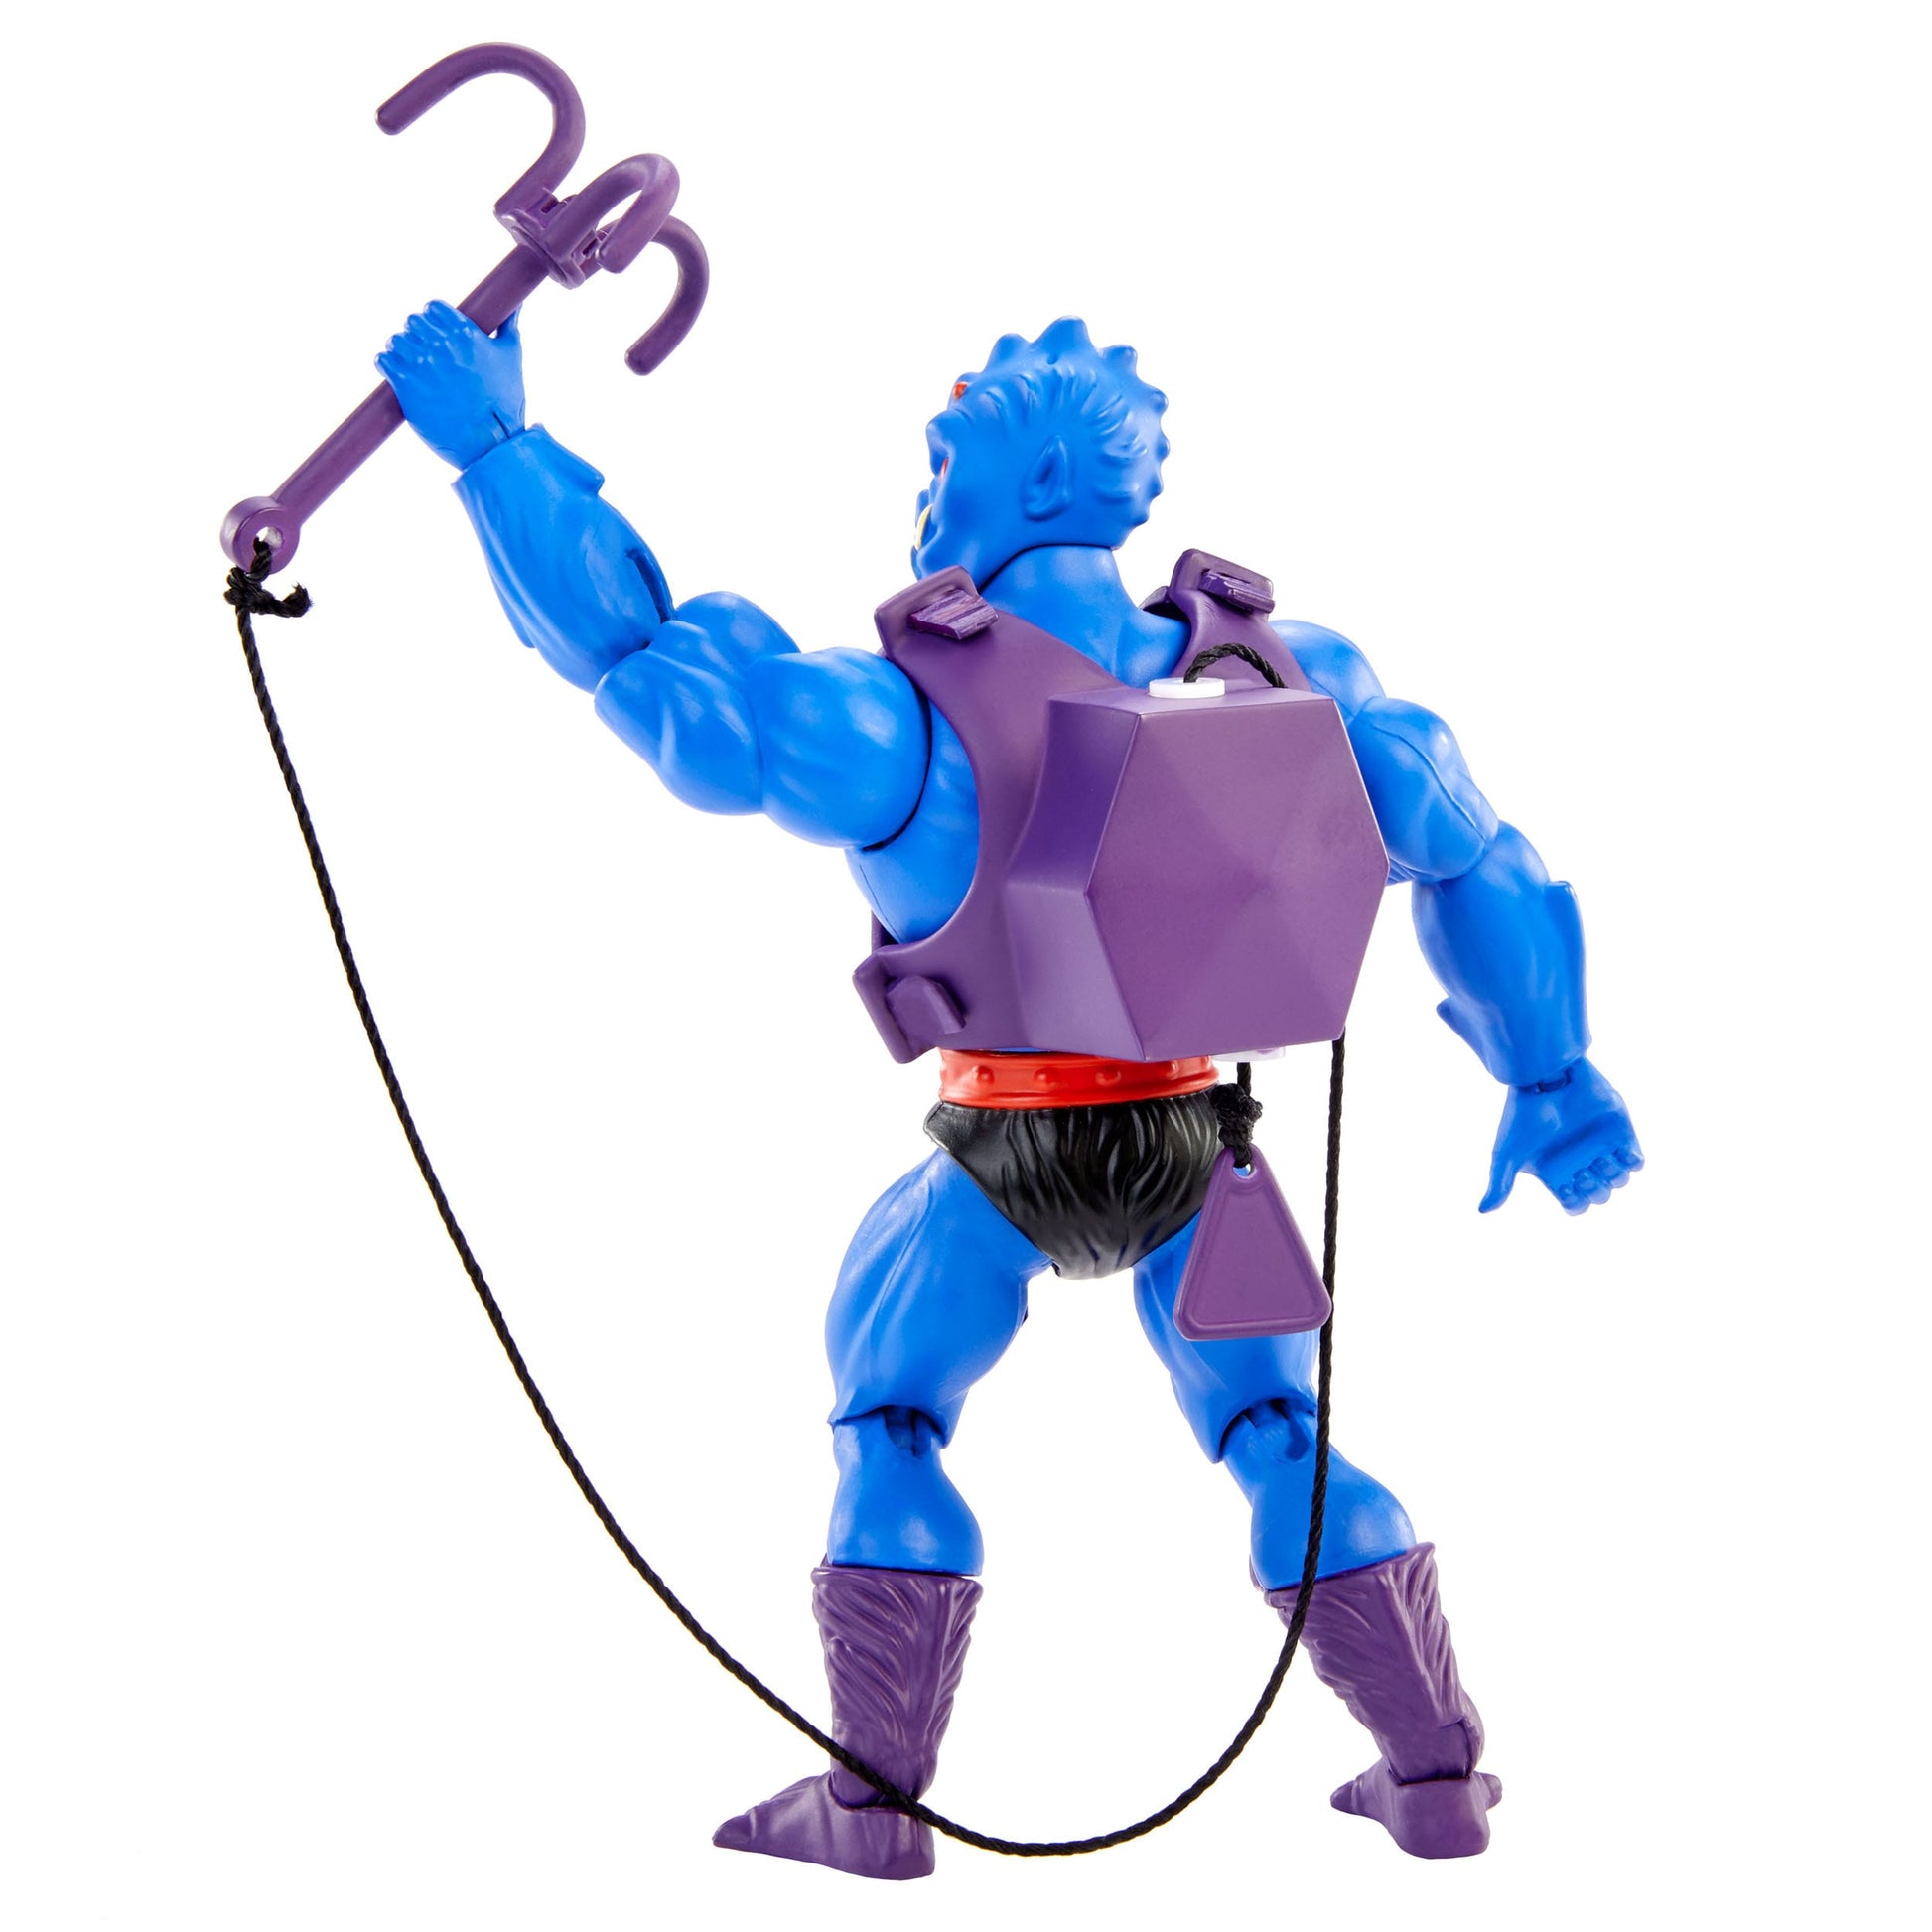 Masters of the Universe Origins Webstor Action Figure - COMING SOON